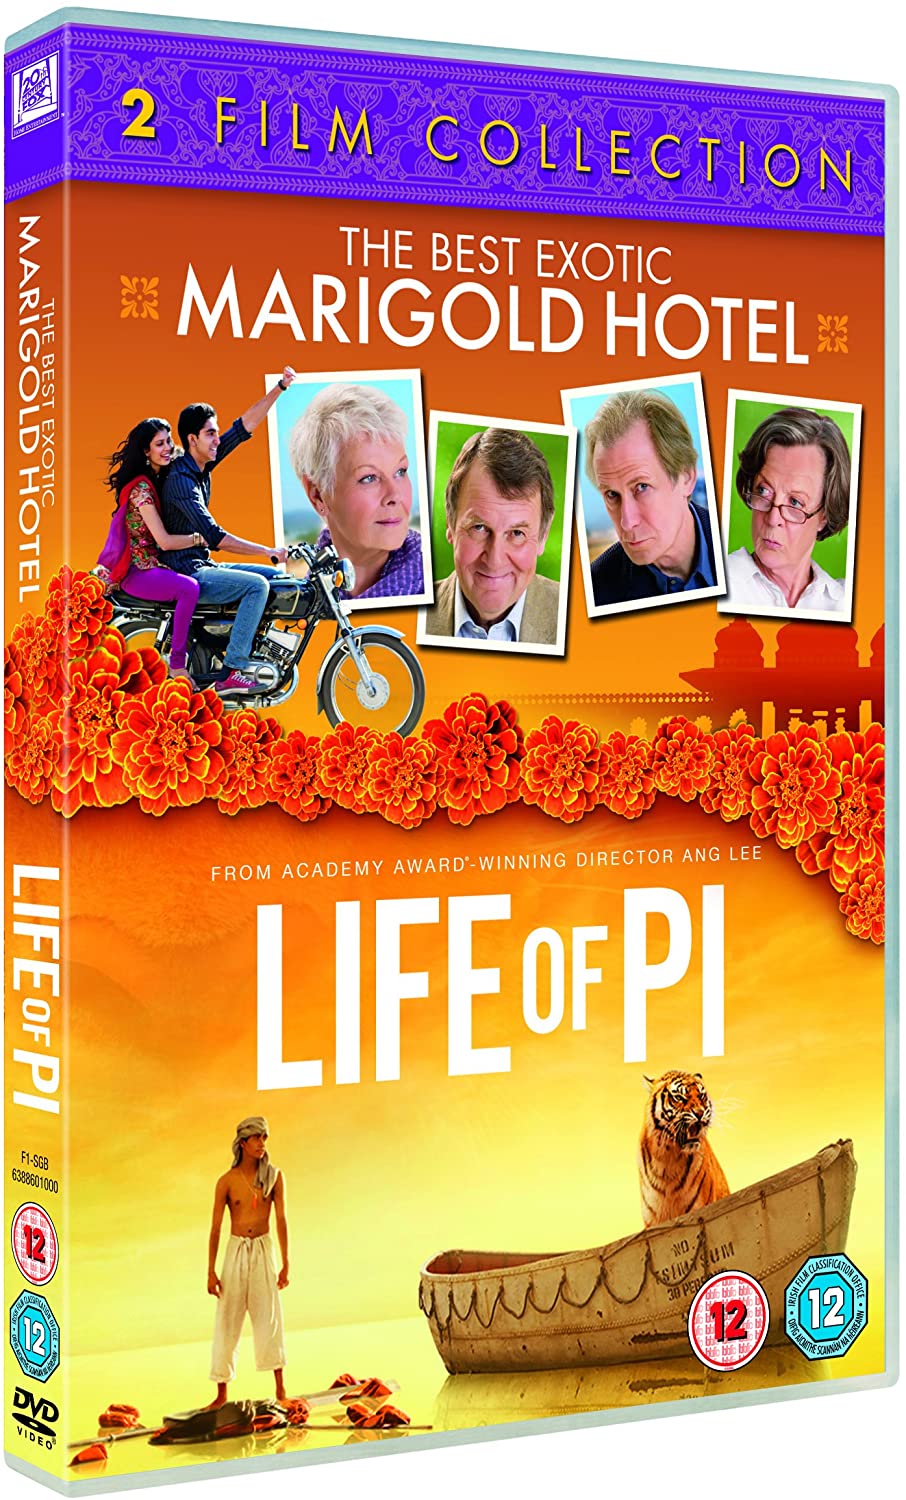 The Best Exotic Marigold Hotel / Life of Pi [Two Film Collection] - Adventure/Drama [DVD]